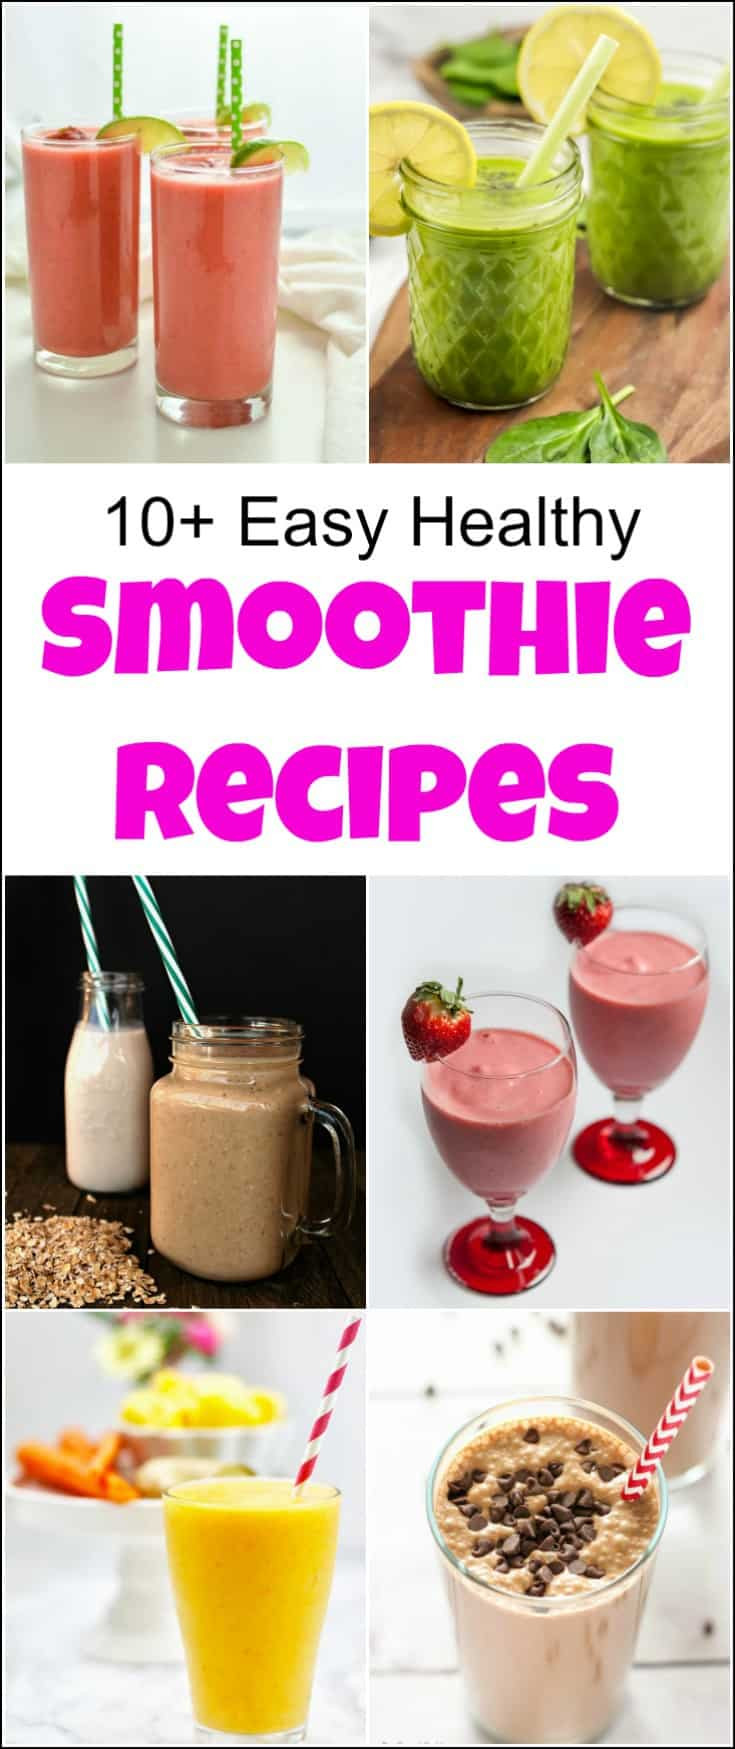 Quick Smoothie Recipes
 10 Easy Healthy Smoothie Recipes Your Whole Family Will Love